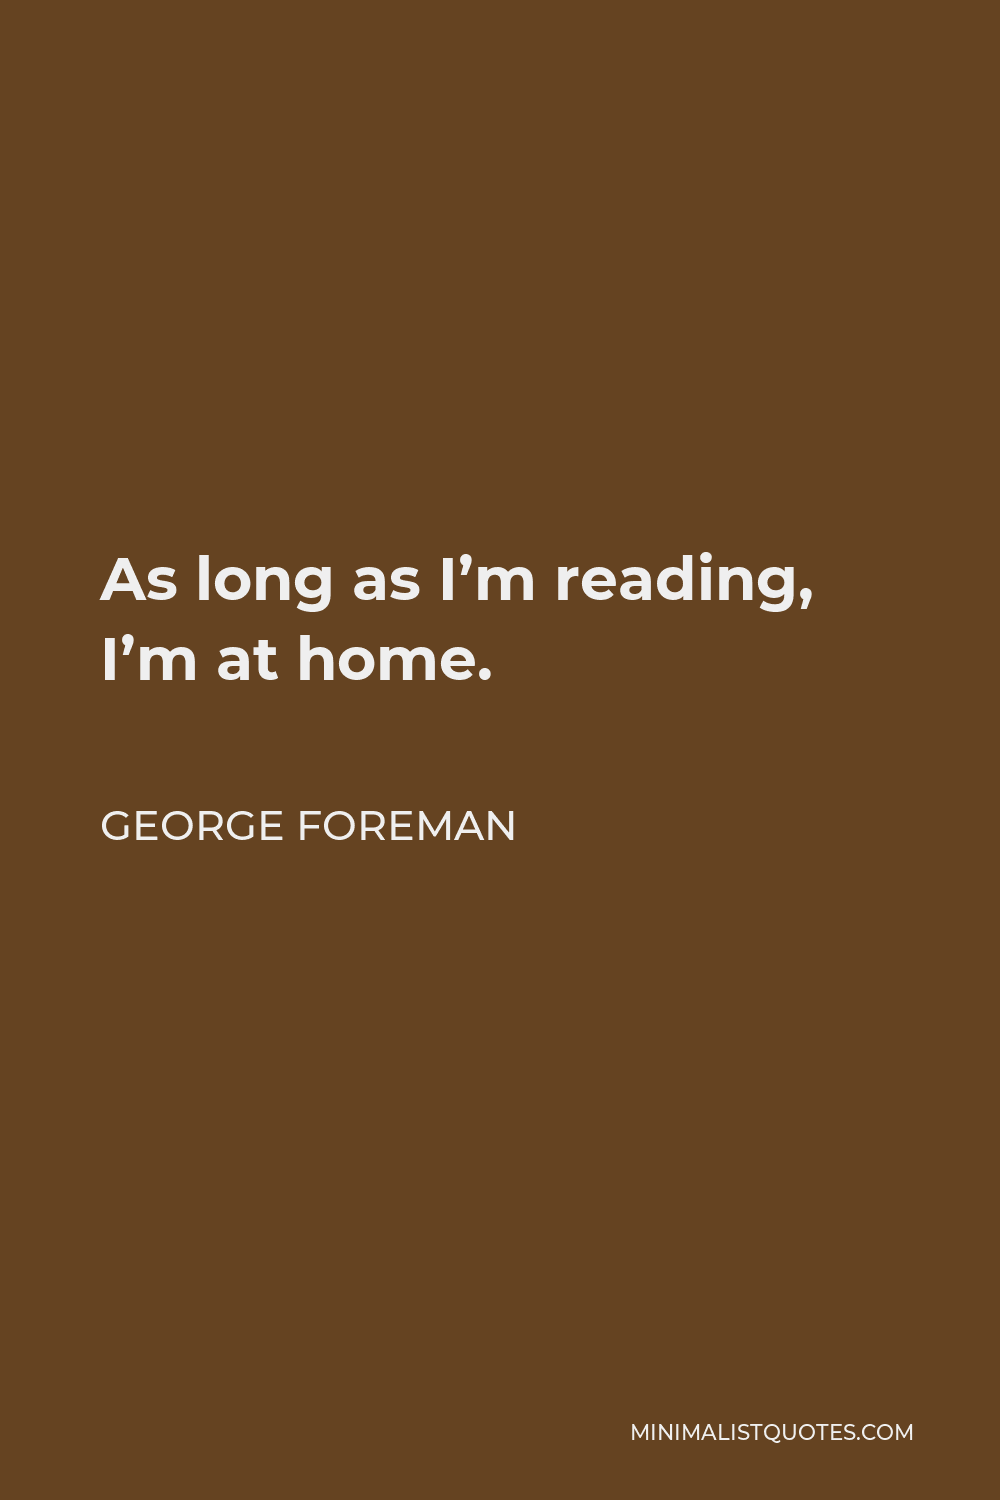 George Foreman Quote - As long as I’m reading, I’m at home.